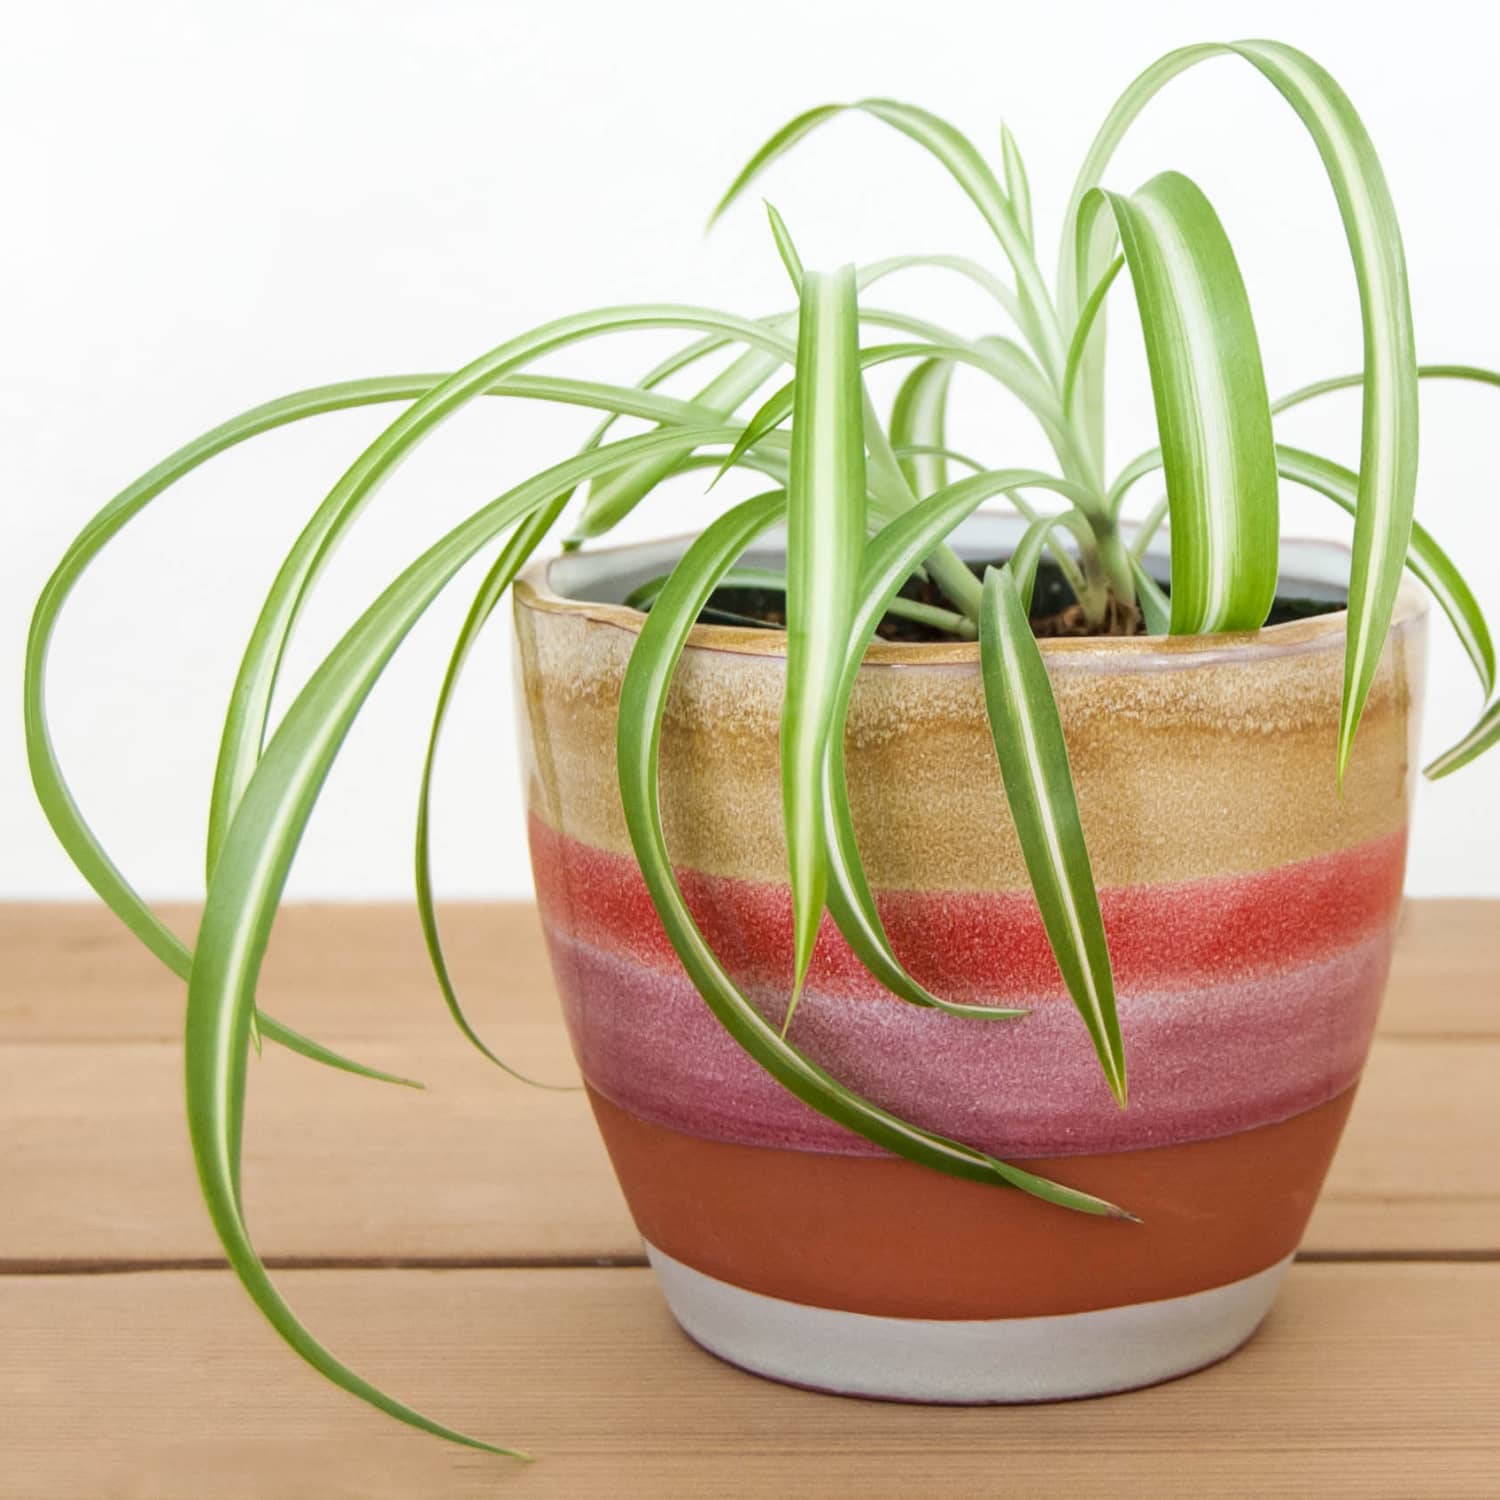 Spider Plant Care How To Grow Maintain An Airplane Plant Apartment Therapy,What Is An Ionizer